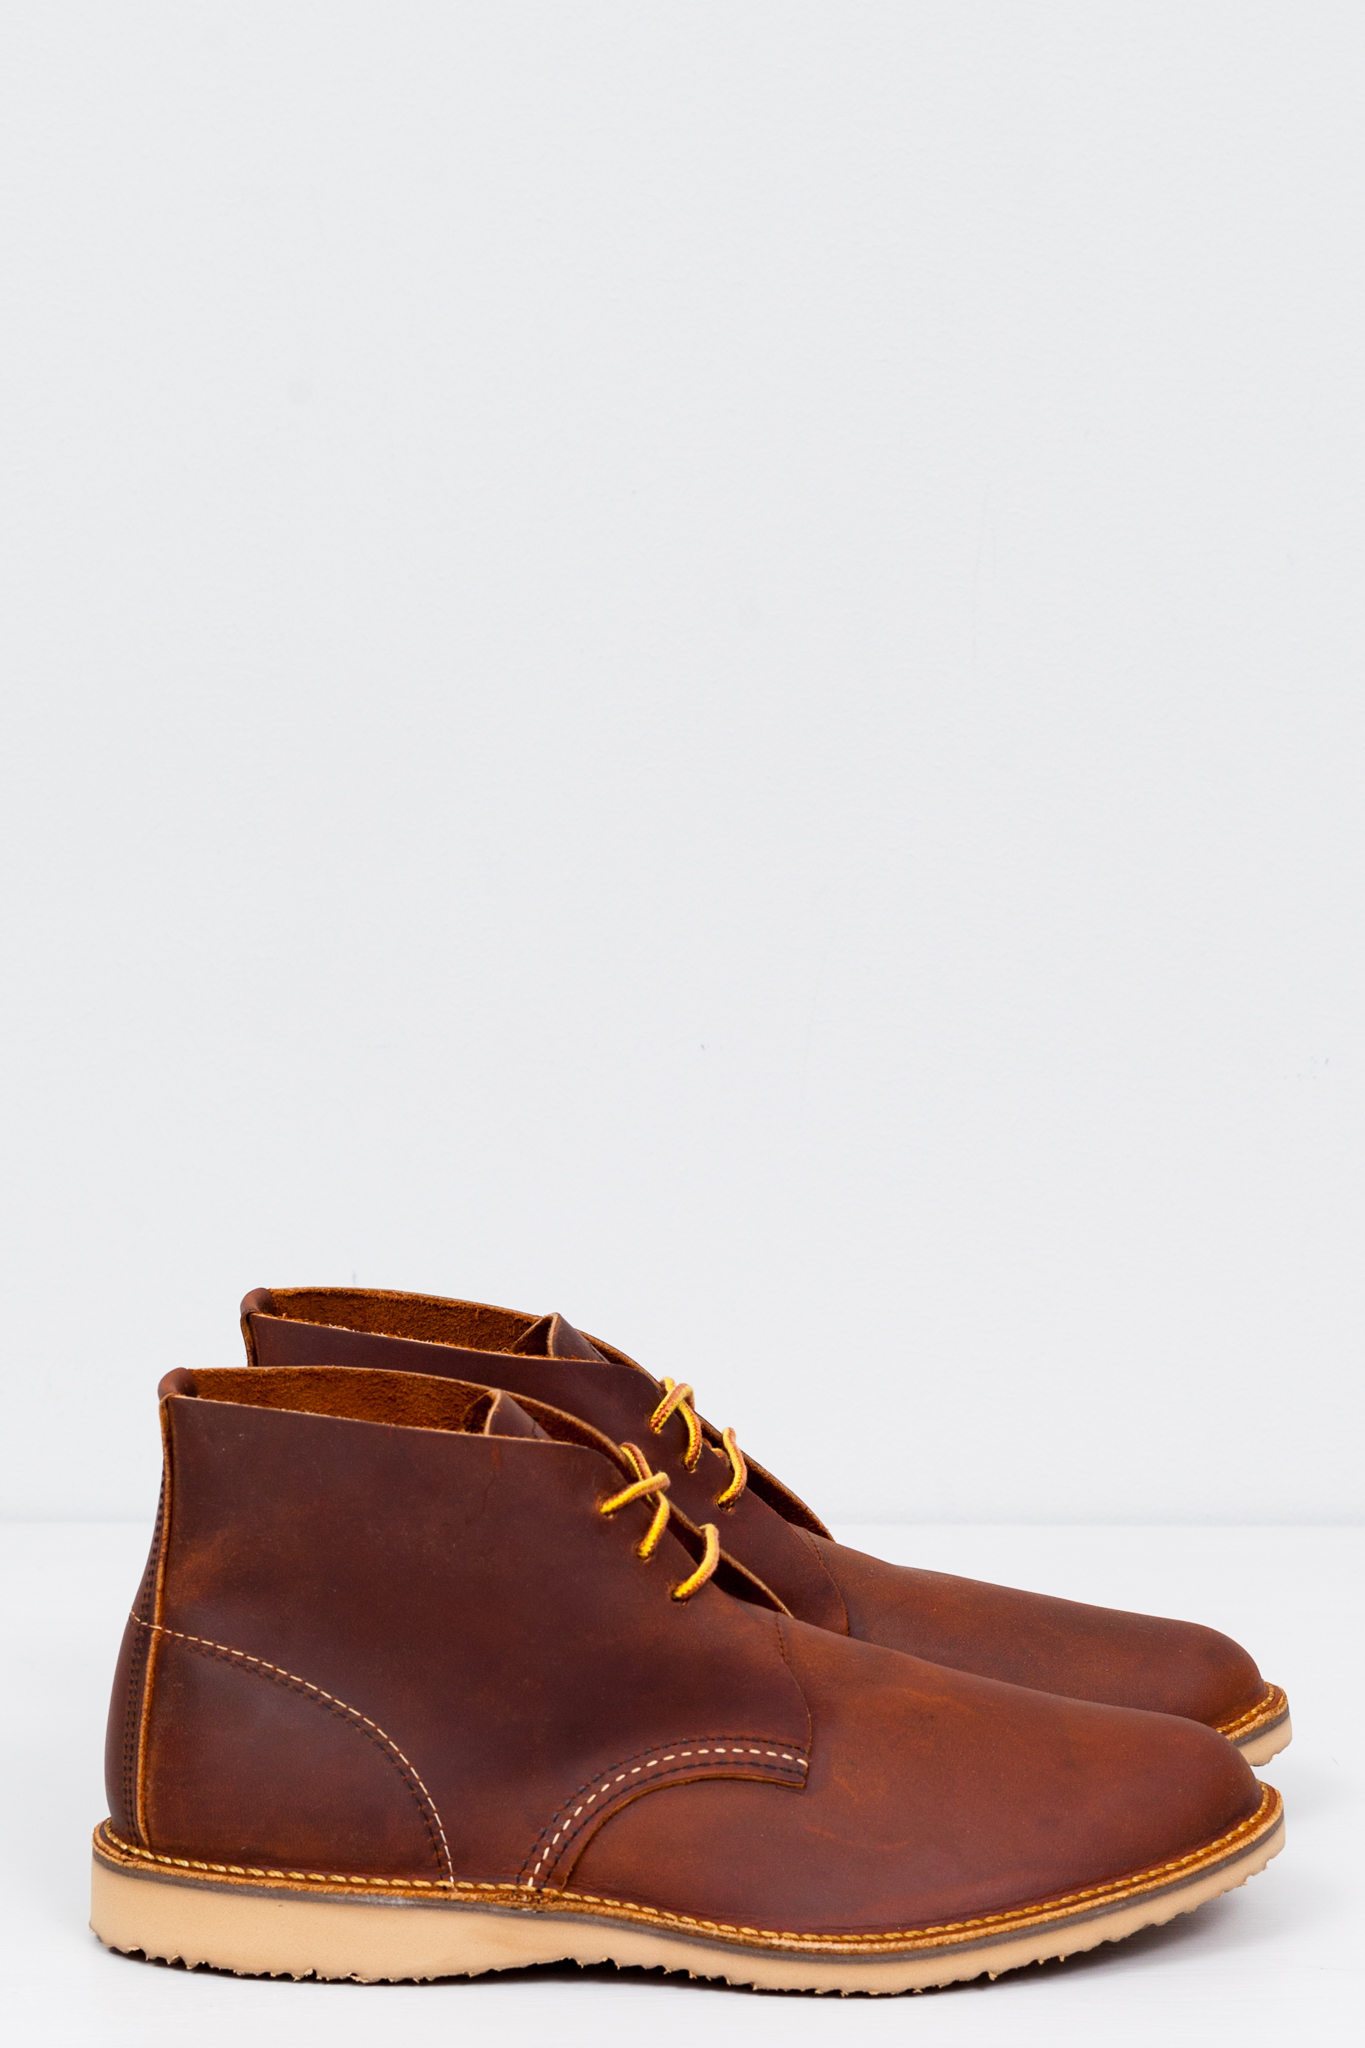 Red Wing Shoes - 3322 Weekender Chukka 